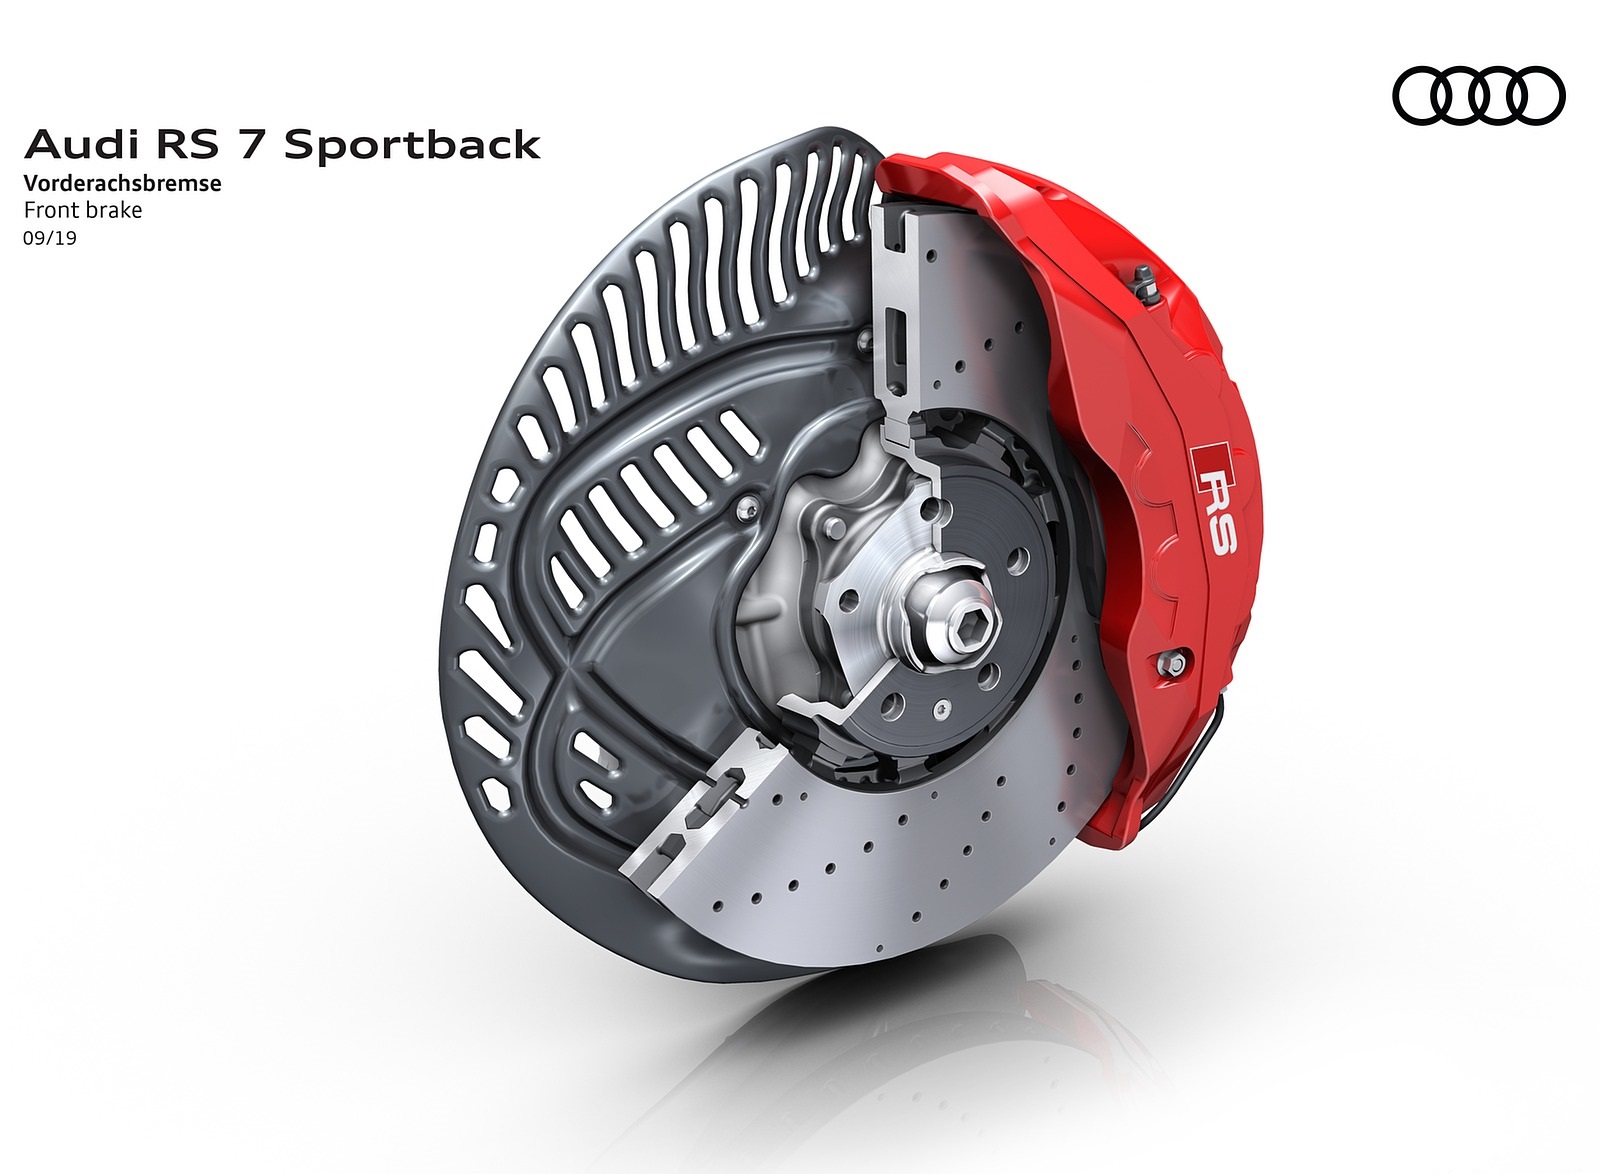 2020 Audi RS 7 Sportback Front brake Wallpapers #92 of 99